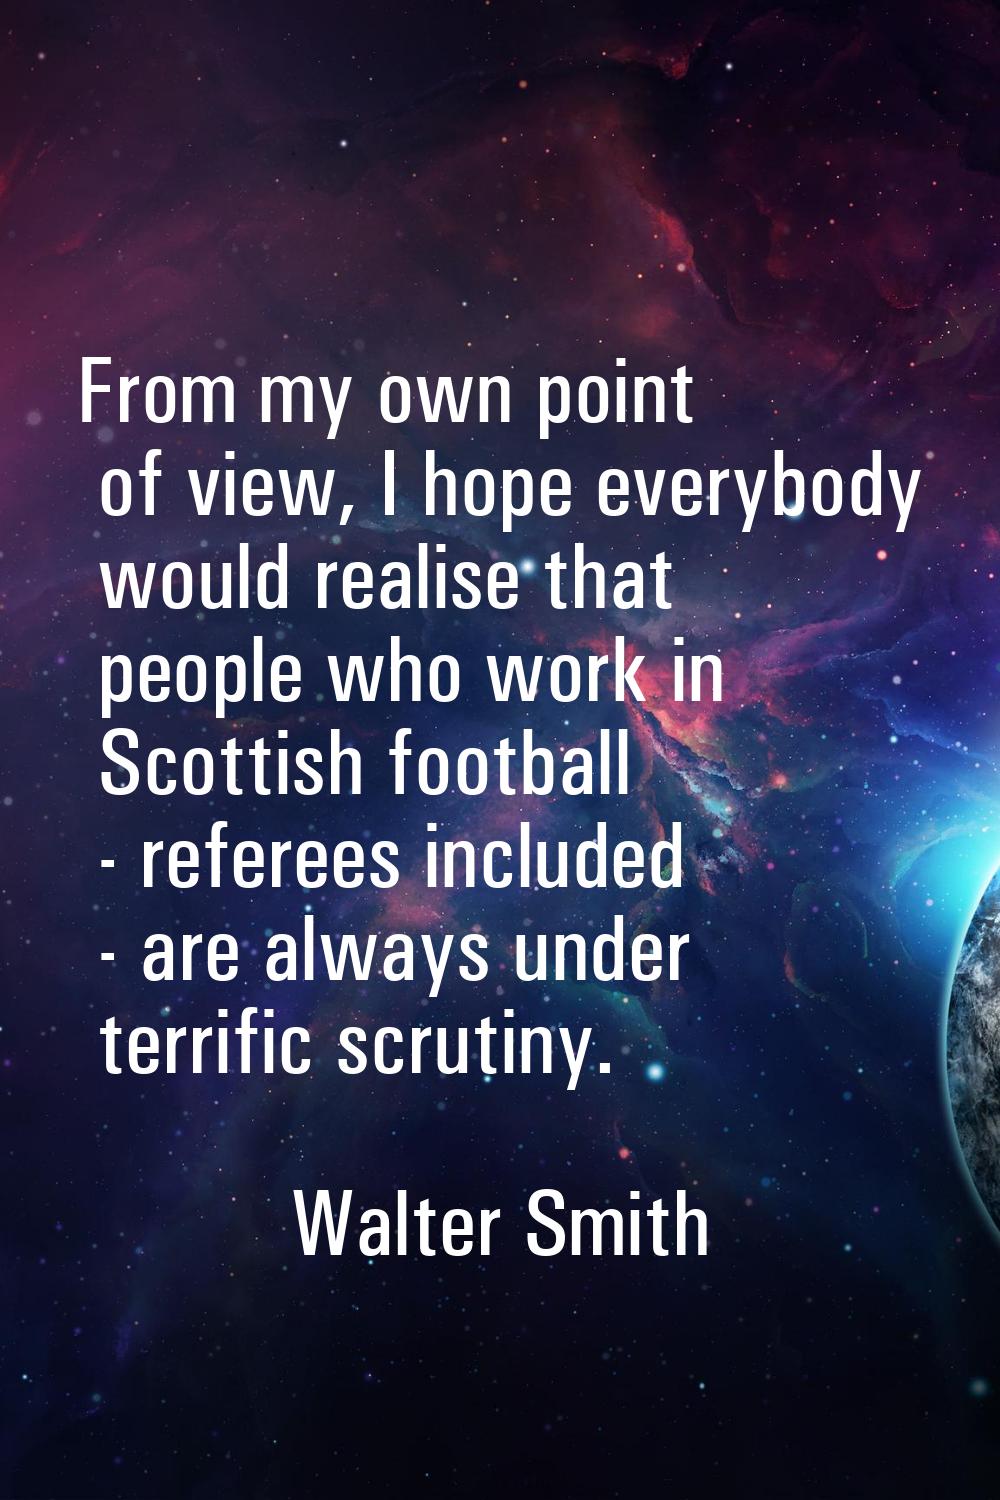 From my own point of view, I hope everybody would realise that people who work in Scottish football